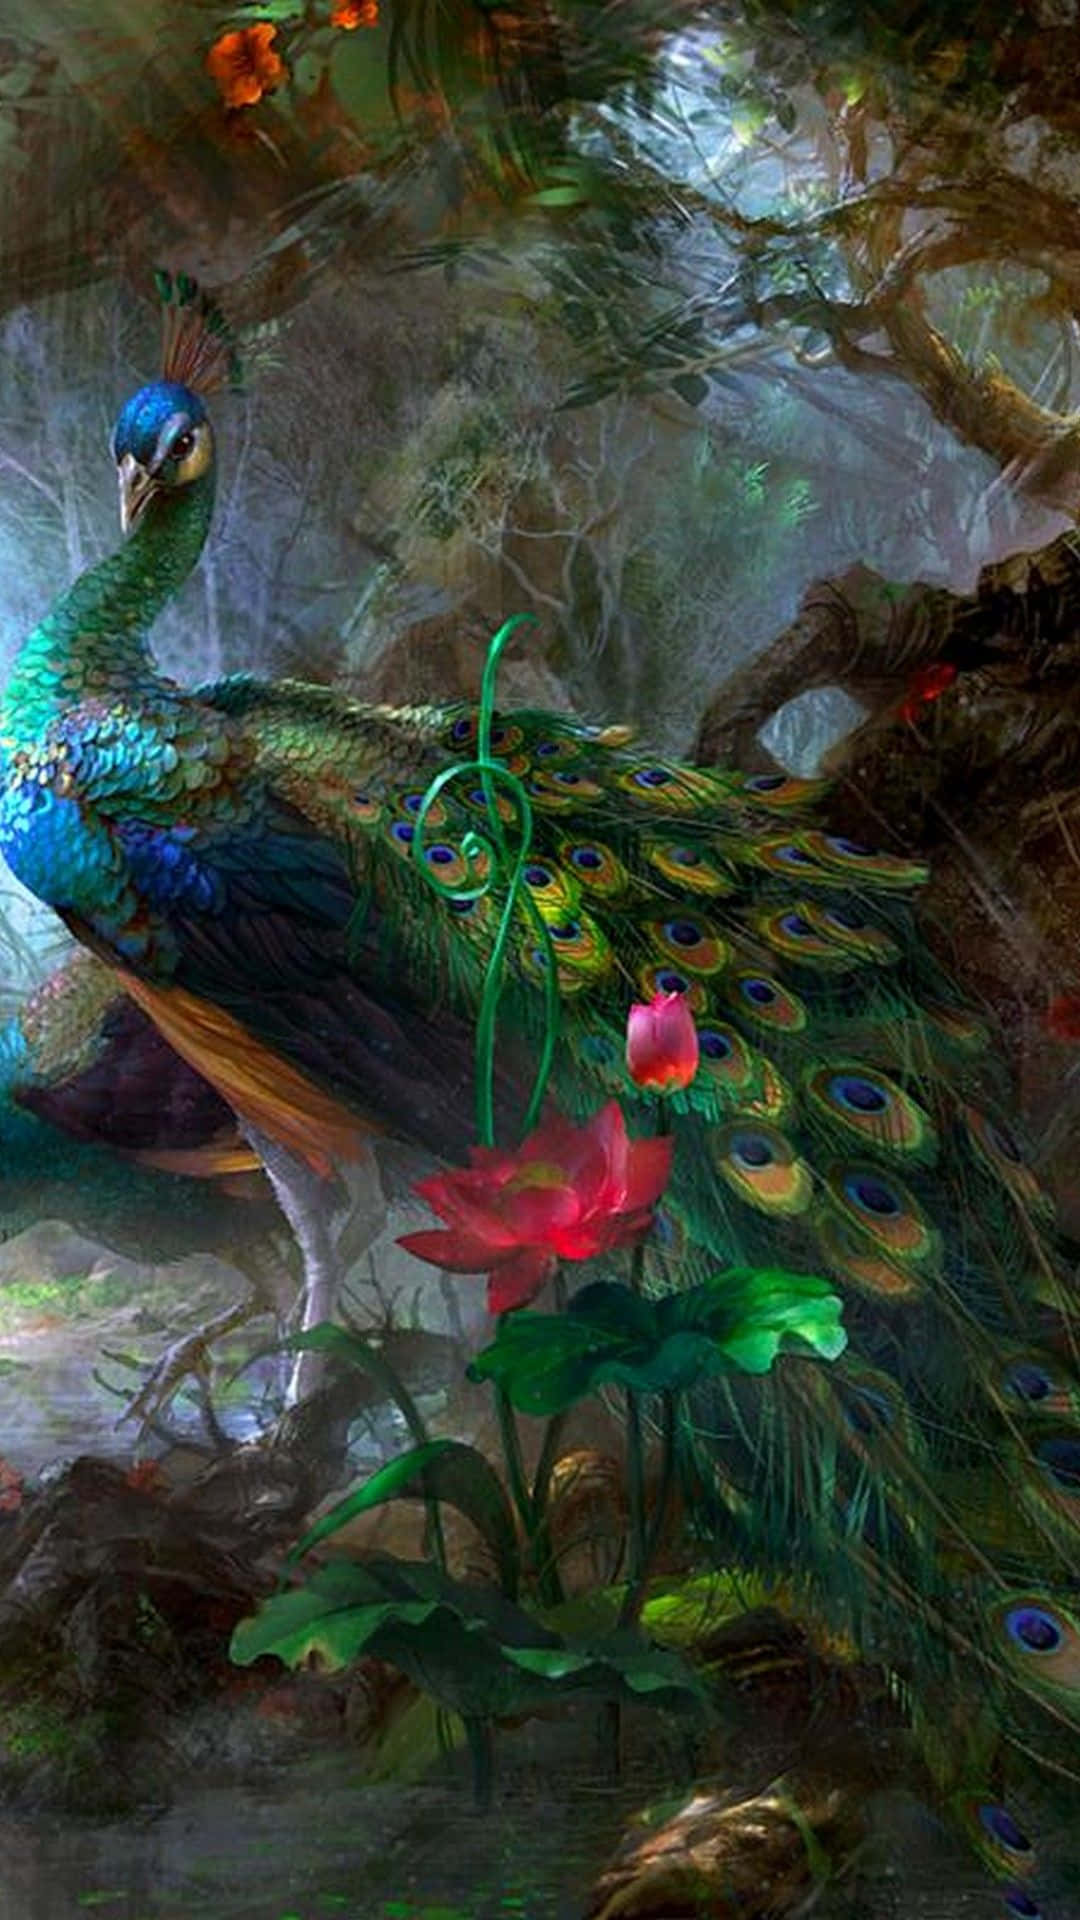 Majestic Peacock Displaying Vibrant Feathers